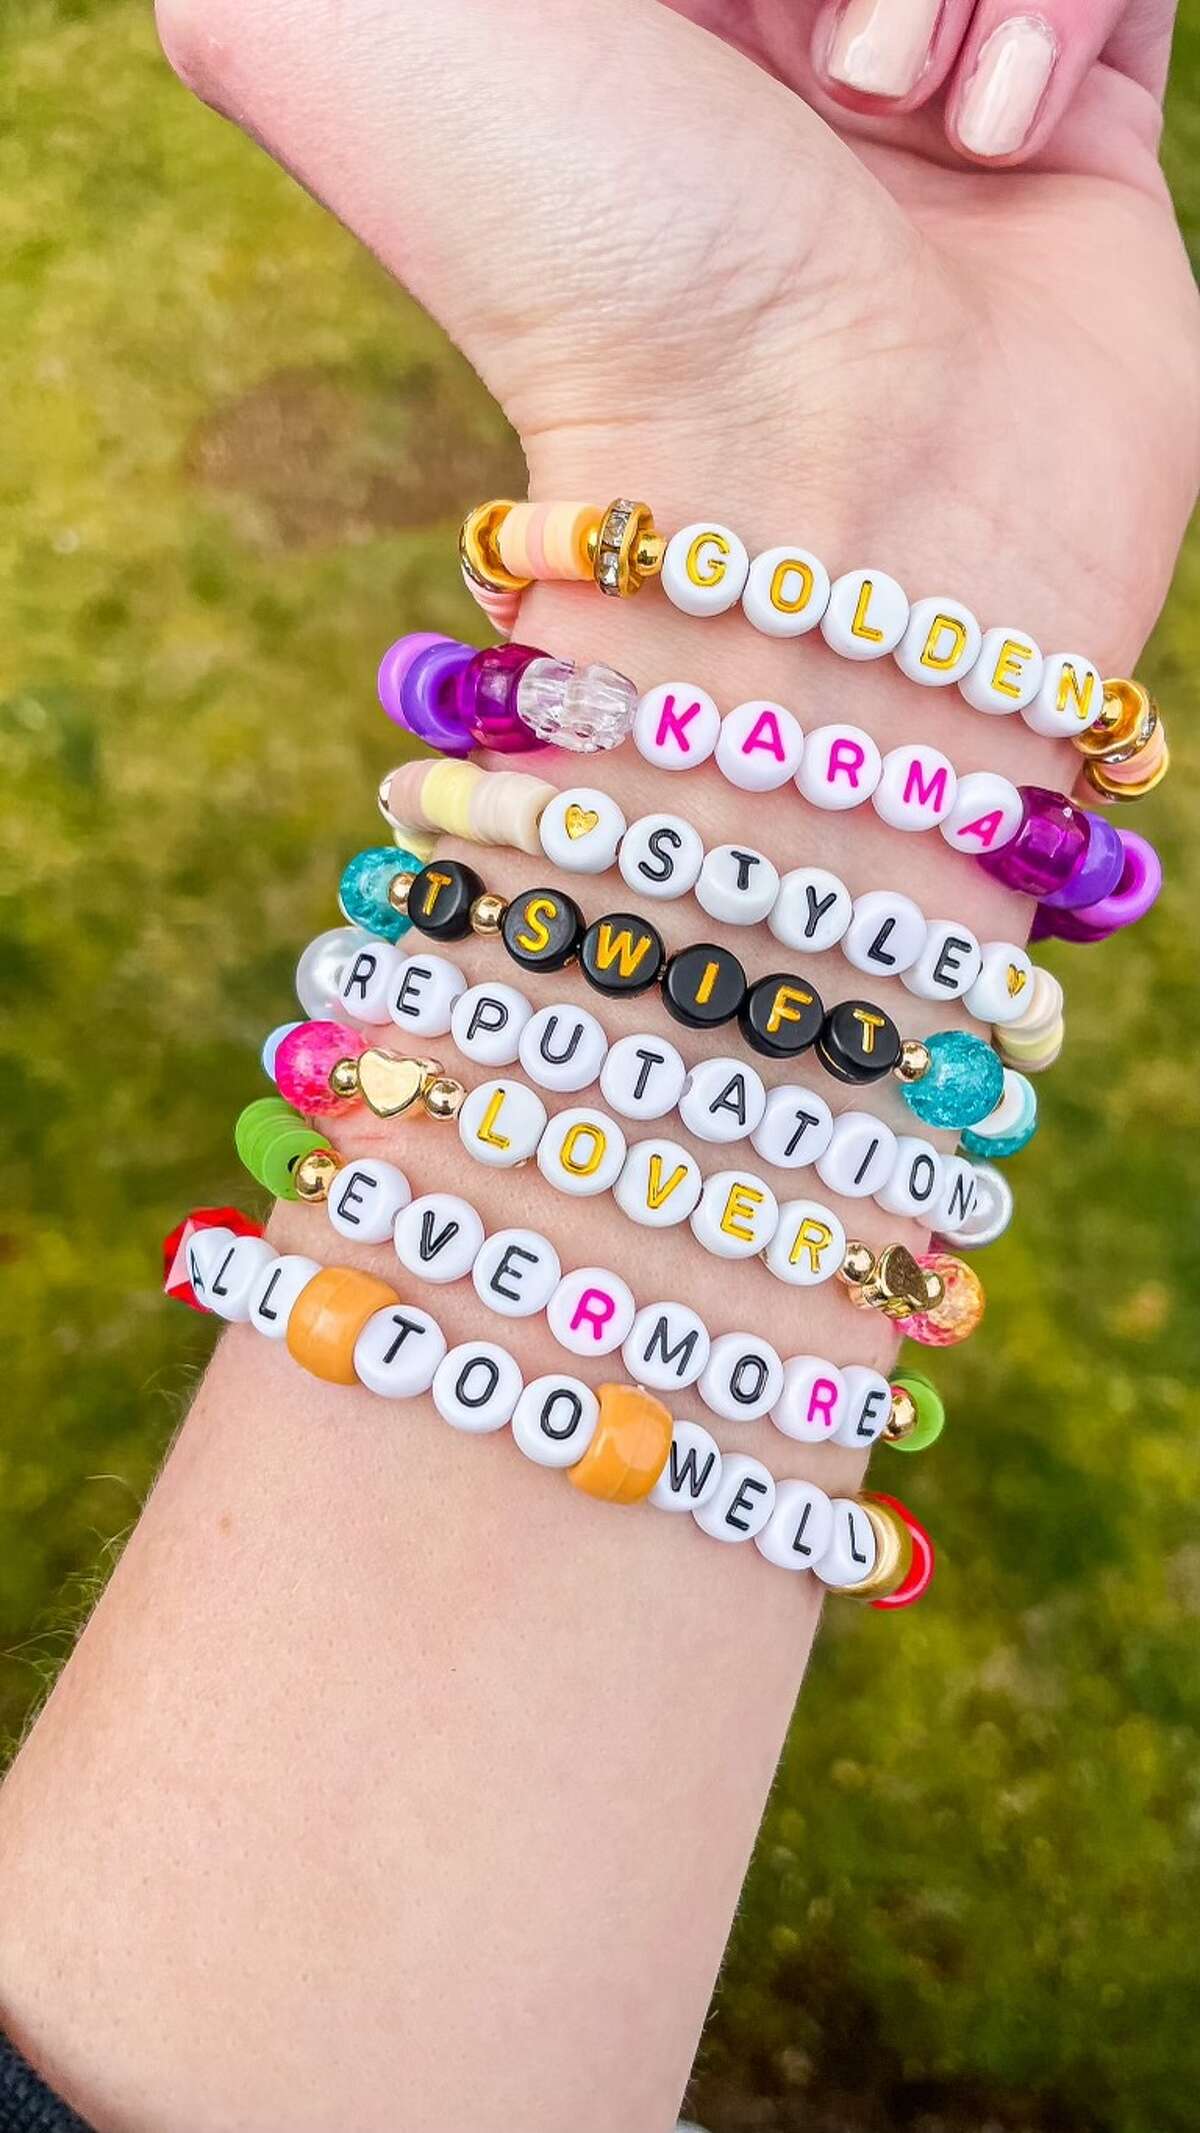 Taylor Swift Fans Are Making Friendship Bracelets to Trade